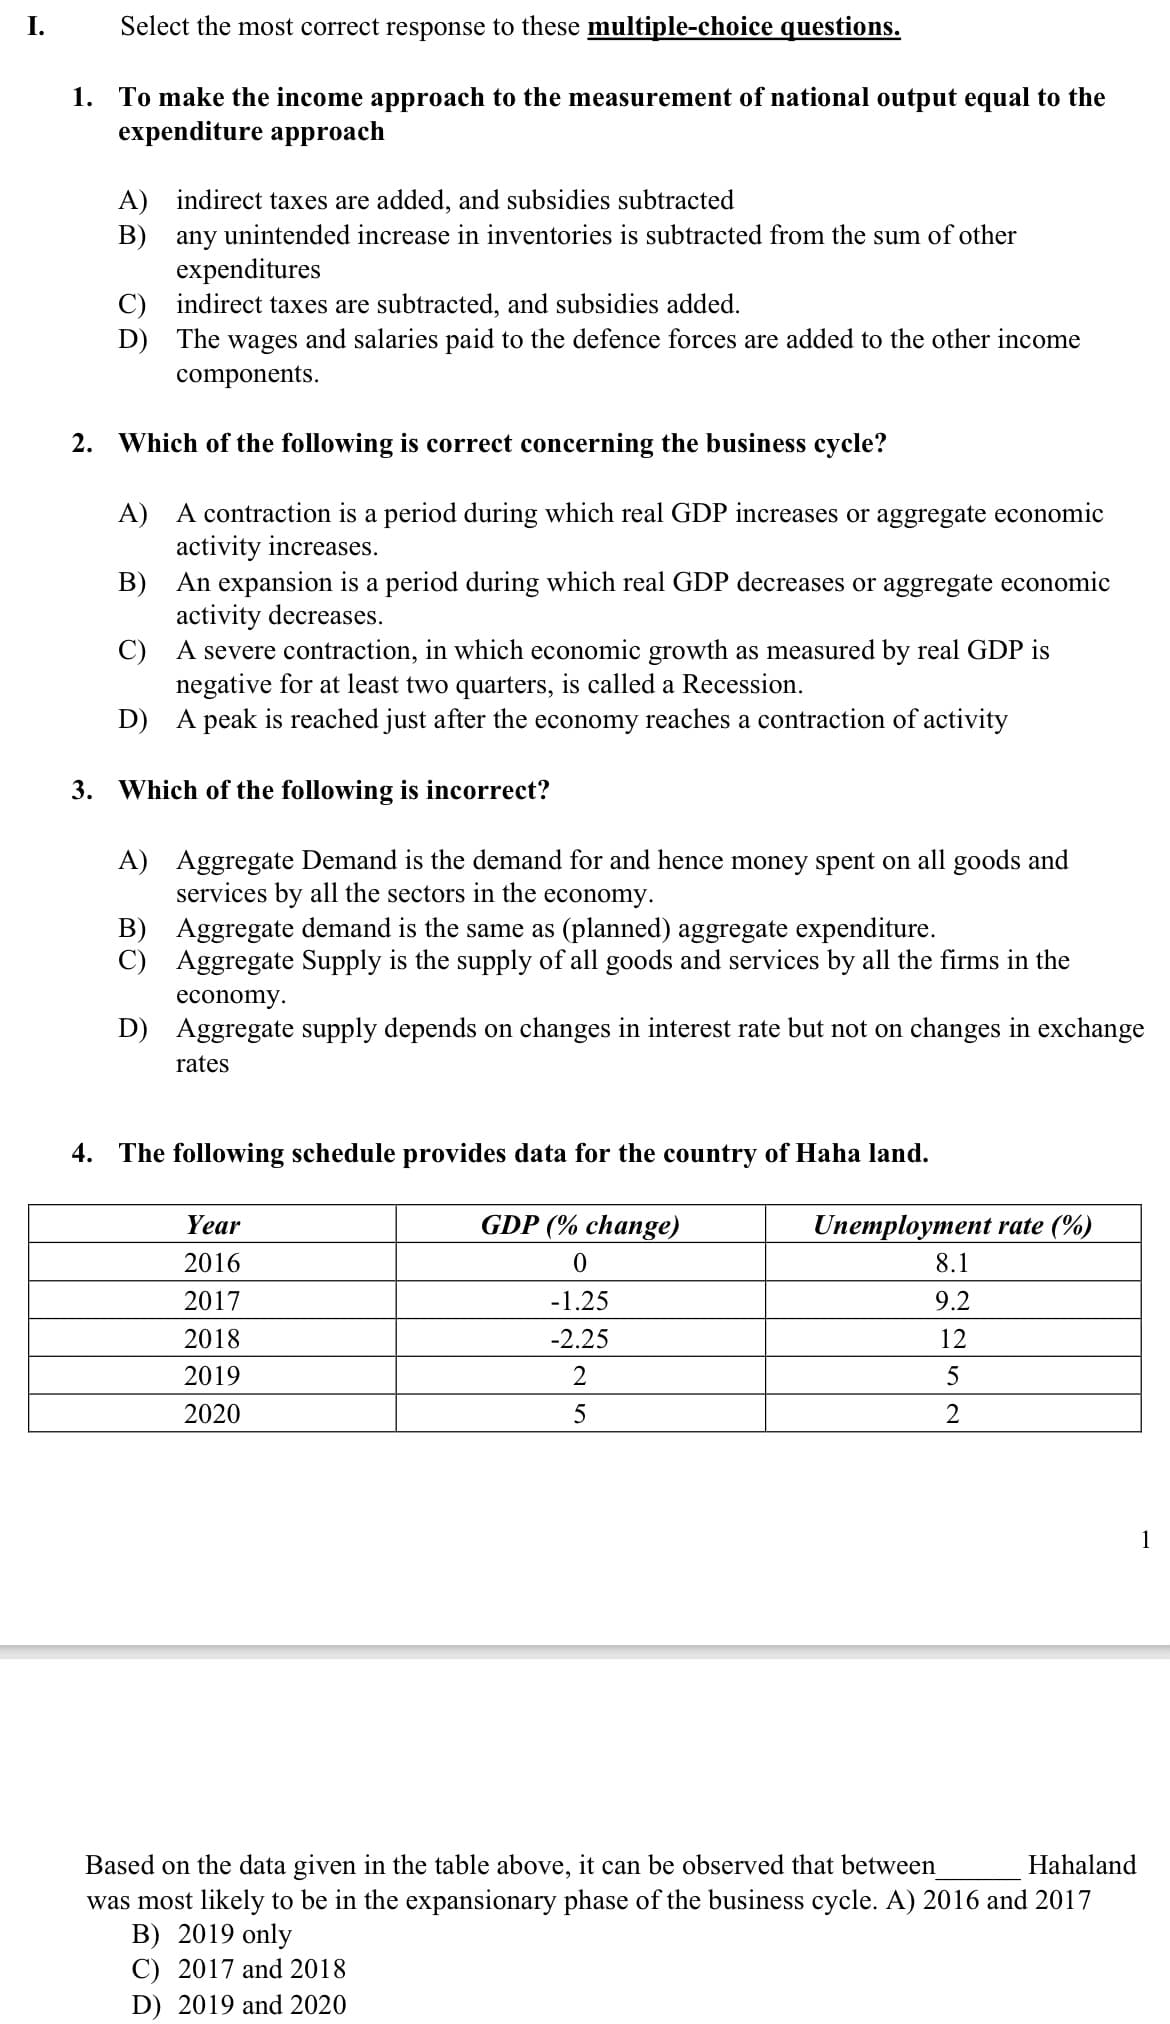 I.
Select the most correct response to these multiple-choice questions.
1. To make the income approach to the measurement of national output equal to the
expenditure approach
A) indirect taxes are added, and subsidies subtracted
B) any unintended increase in inventories is subtracted from the sum of other
expenditures
C) indirect taxes are subtracted, and subsidies added.
D) The wages and salaries paid to the defence forces are added to the other income
components.
2. Which of the following is correct concerning the business cycle?
A) A contraction is a period during which real GDP increases or aggregate economic
activity increases.
B) An expansion is a period during which real GDP decreases or aggregate economic
activity decreases.
C) A severe contraction, in which economic growth as measured by real GDP is
negative for at least two quarters, is called a Recession.
D) A peak is reached just after the economy reaches a contraction of activity
3. Which of the following is incorrect?
A) Aggregate Demand is the demand for and hence money spent on all goods and
services by all the sectors in the economy.
B) Aggregate demand is the same as (planned) aggregate expenditure.
C) Aggregate Supply is the supply of all goods and services by all the firms in the
economy.
D) Aggregate supply depends on changes in interest rate but not on changes in exchange
rates
4. The following schedule provides data for the country of Haha land.
Year
GDP (% change)
Unemployment rate (%)
2016
8.1
2017
-1.25
9.2
2018
-2.25
12
2019
2
2020
5
2
1
Based on the data given in the table above, it can be observed that between
was most likely to be in the expansionary phase of the business cycle. A) 2016 and 2017
B) 2019 only
C) 2017 and 2018
Hahaland
D) 2019 and 2020
